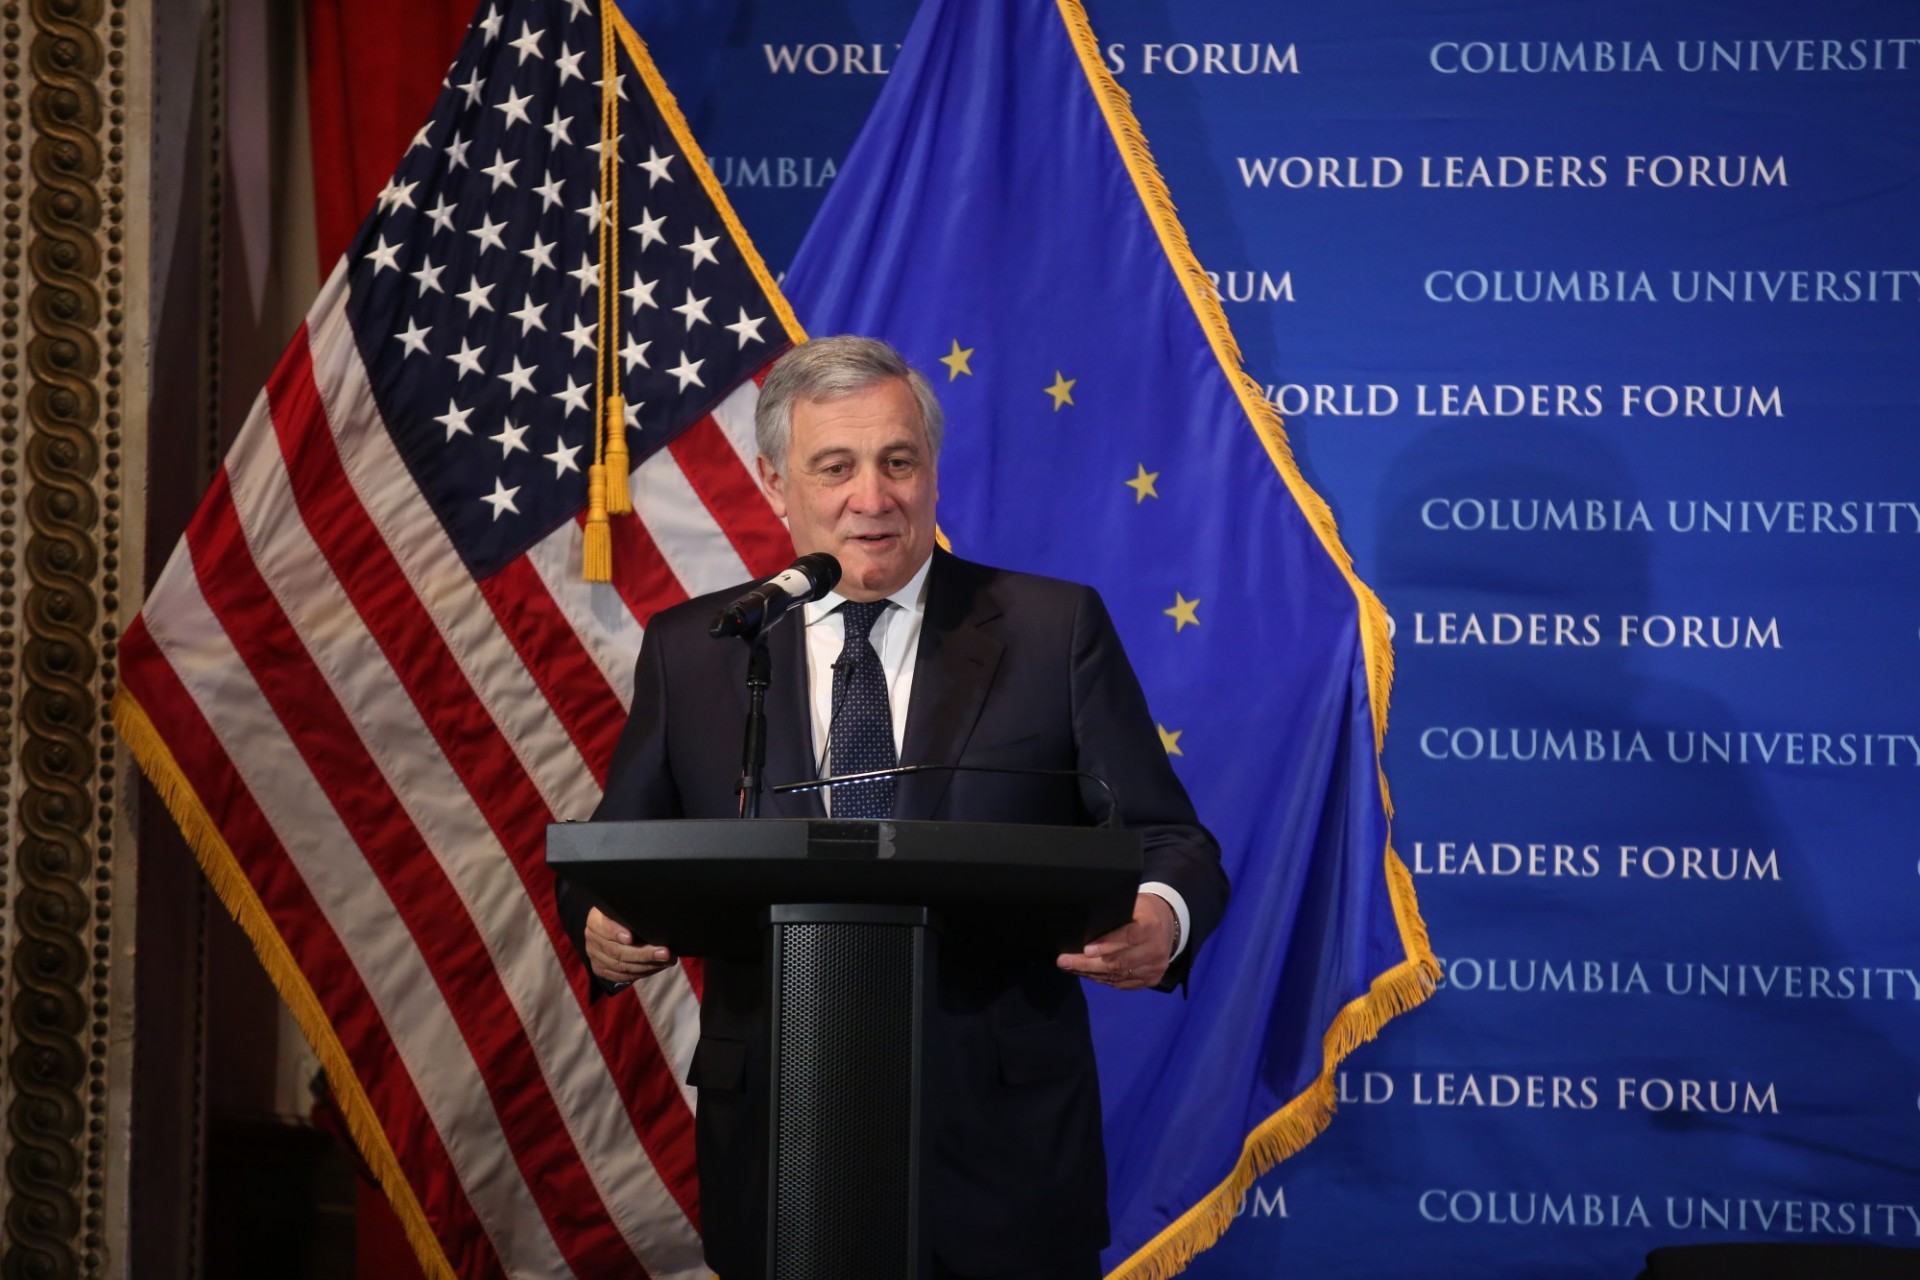 President Antonio Tajani of the European Parliament delivers his address, "United States and Europe must stand together to better defend our shared values," to Columbia University students, faculty and staff.